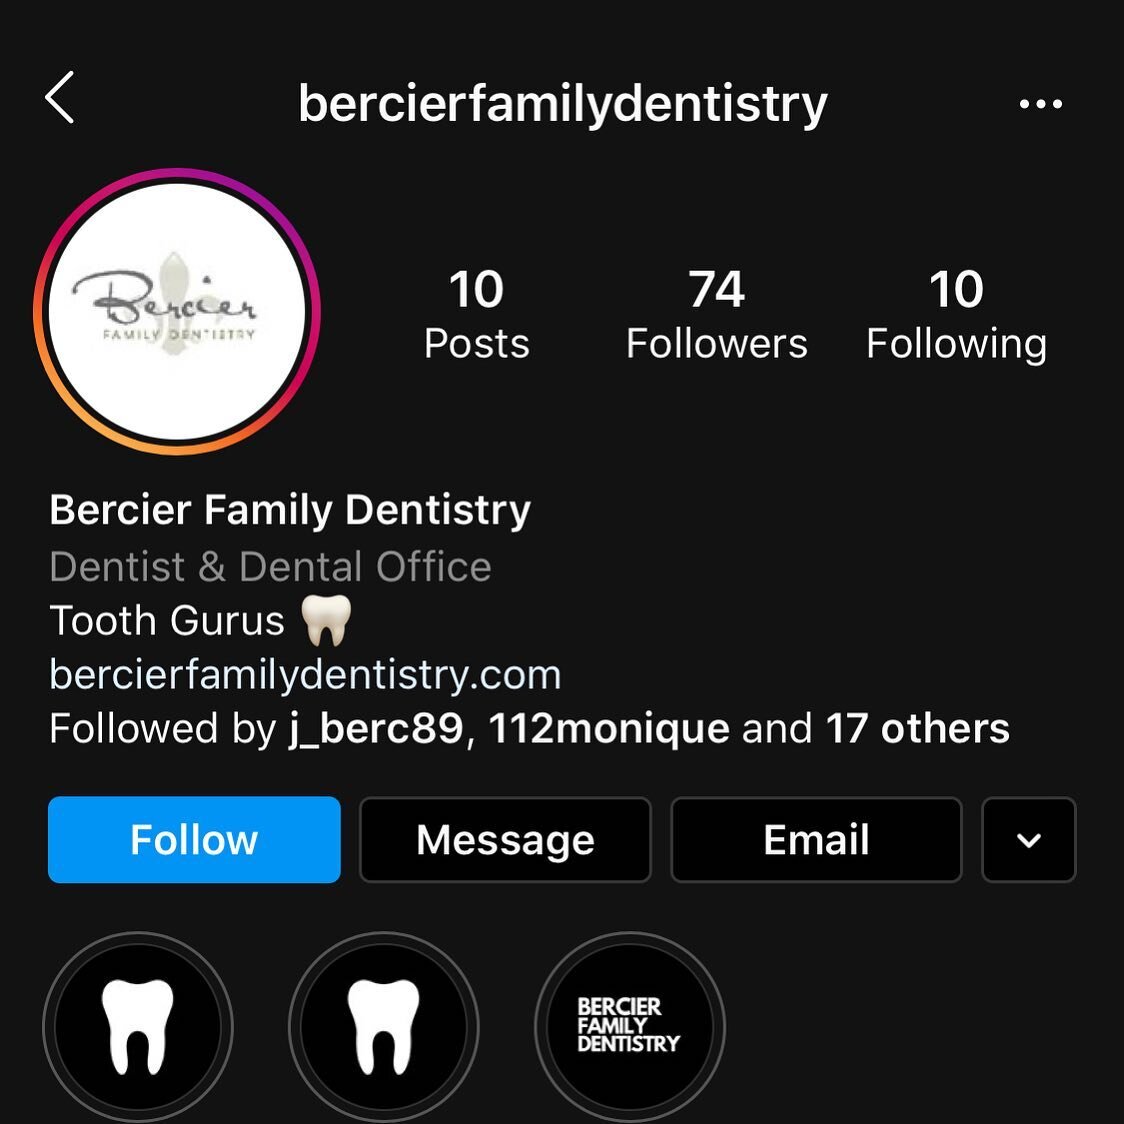 Our Instagram is getting new updates everyday! 
Follow us for the latest about us, dental information and so much more. 
Did you know if you follow us, you&rsquo;ll be entered to win an electric Sonicare toothbrush?? Winner drawn on July 2!